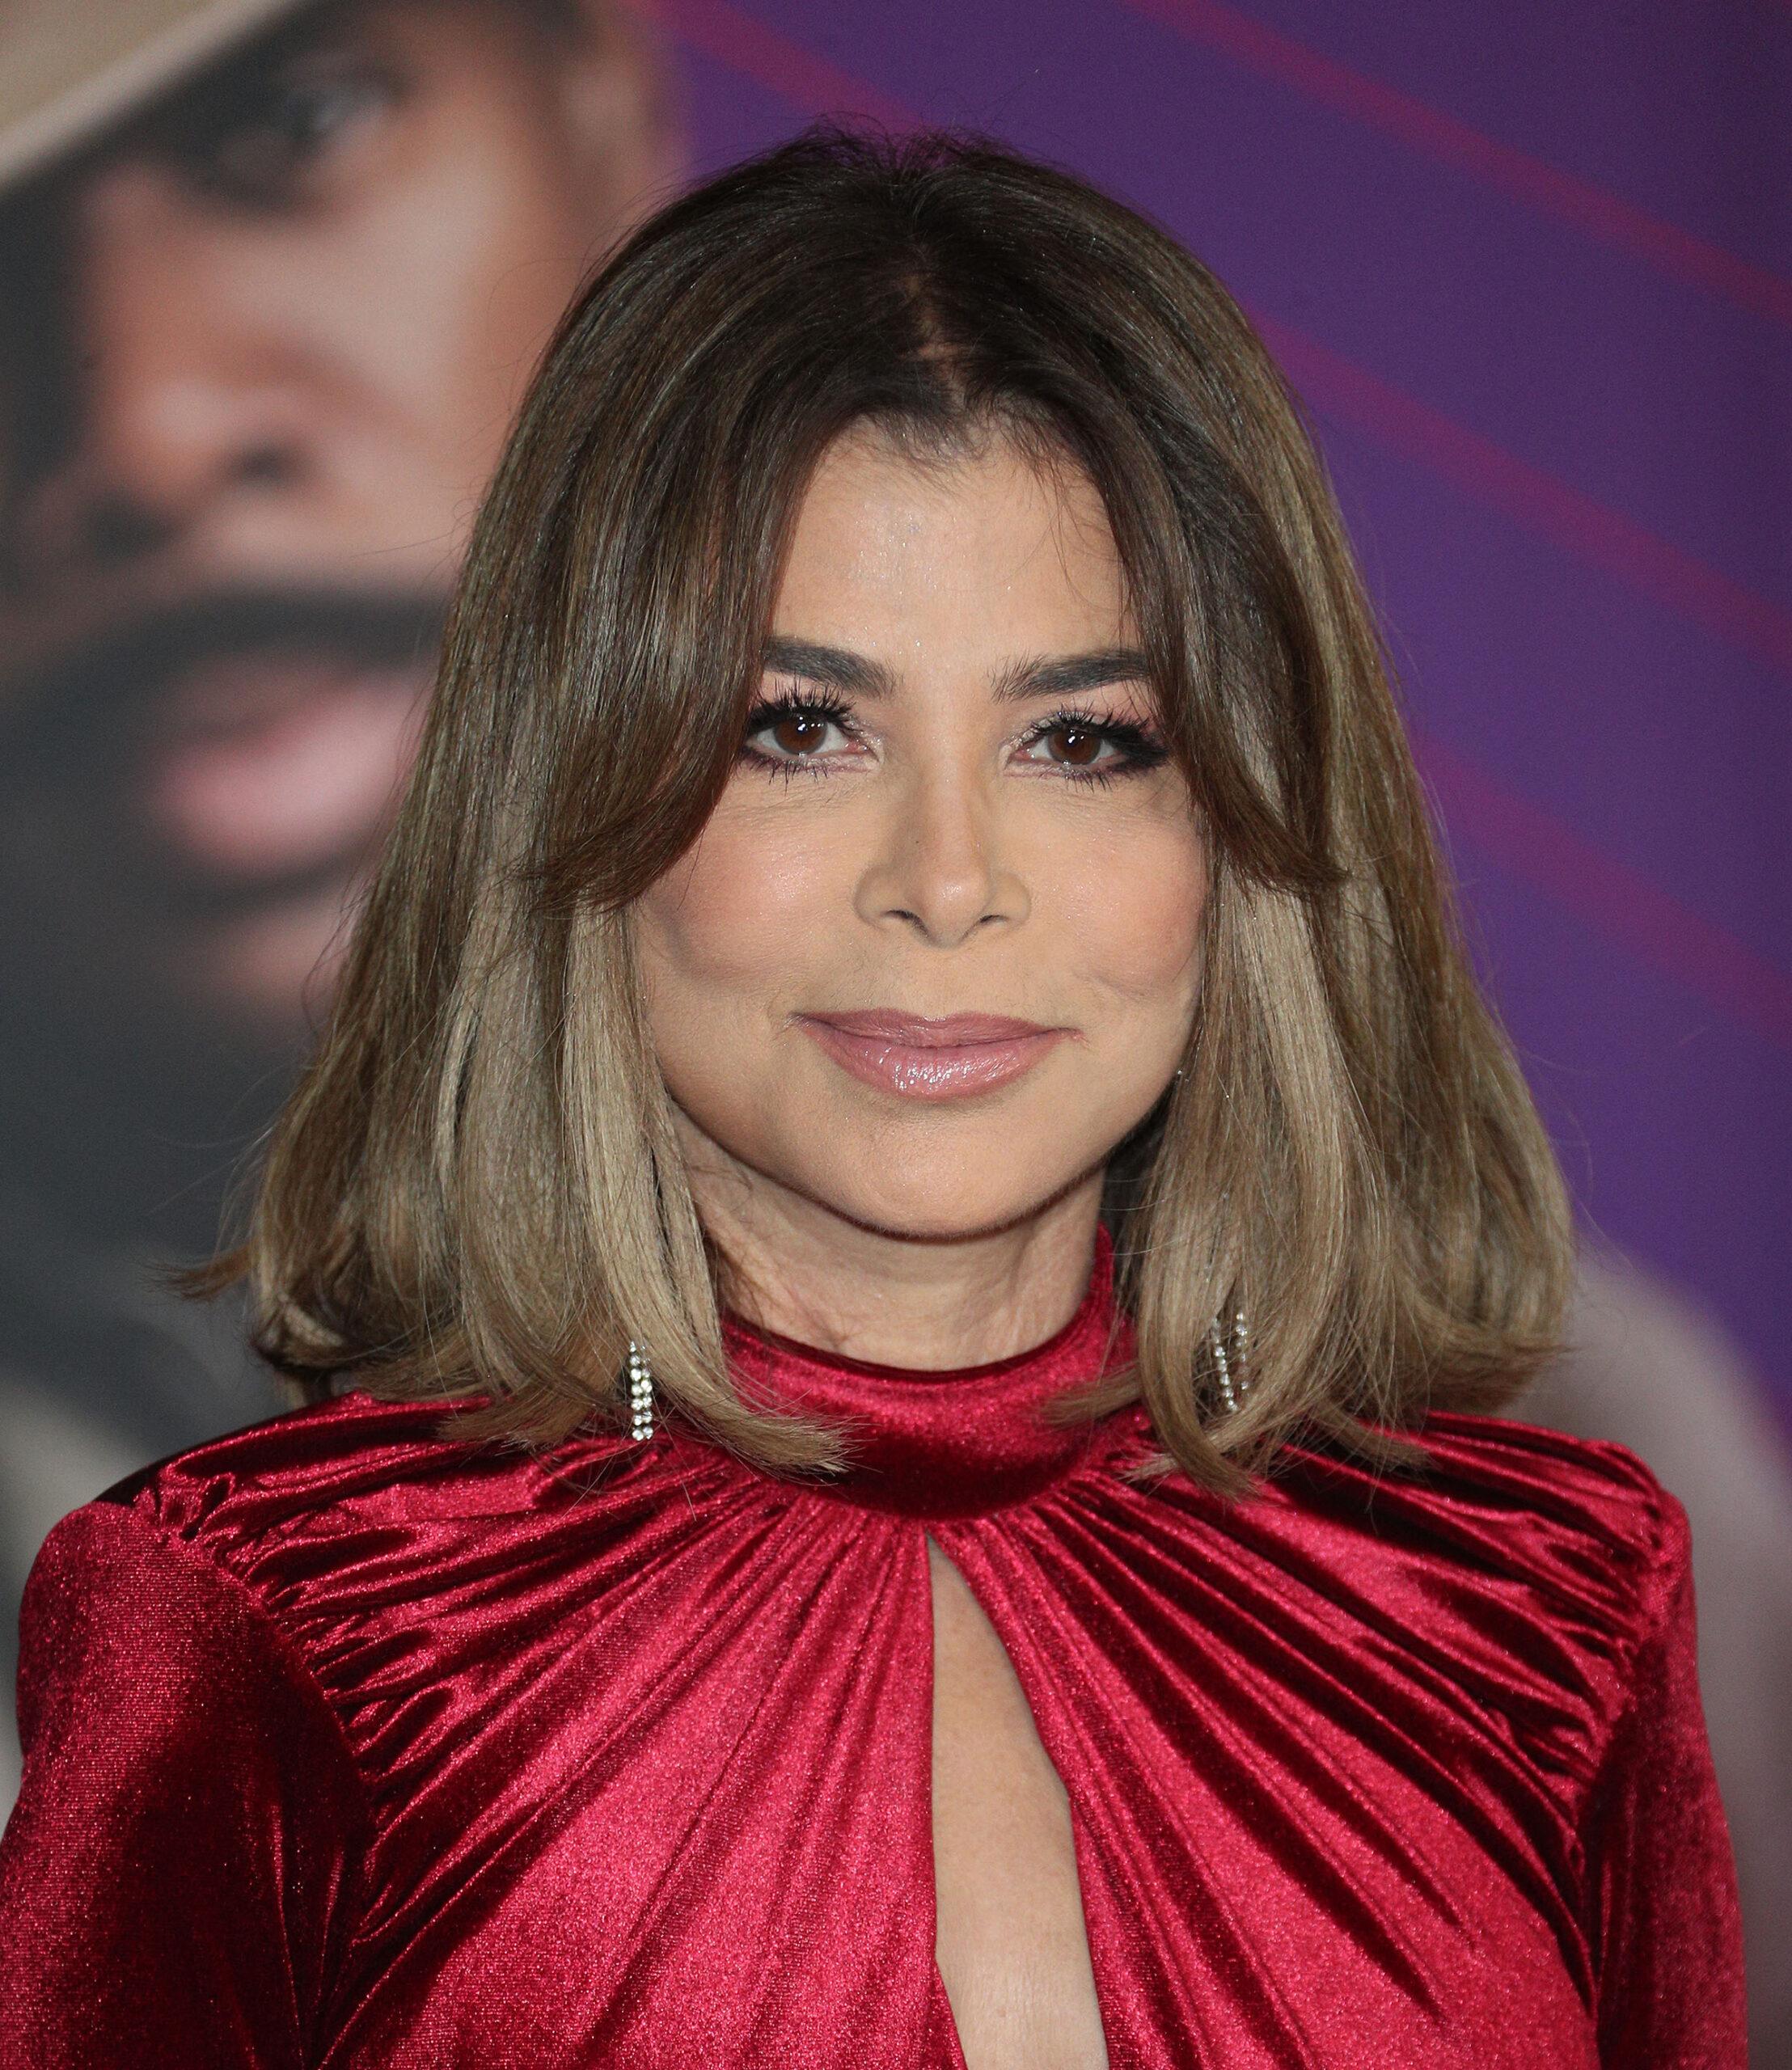 Paula Abdul Seen For First Time Since Bombshell Nigel Lythgoe Accusations